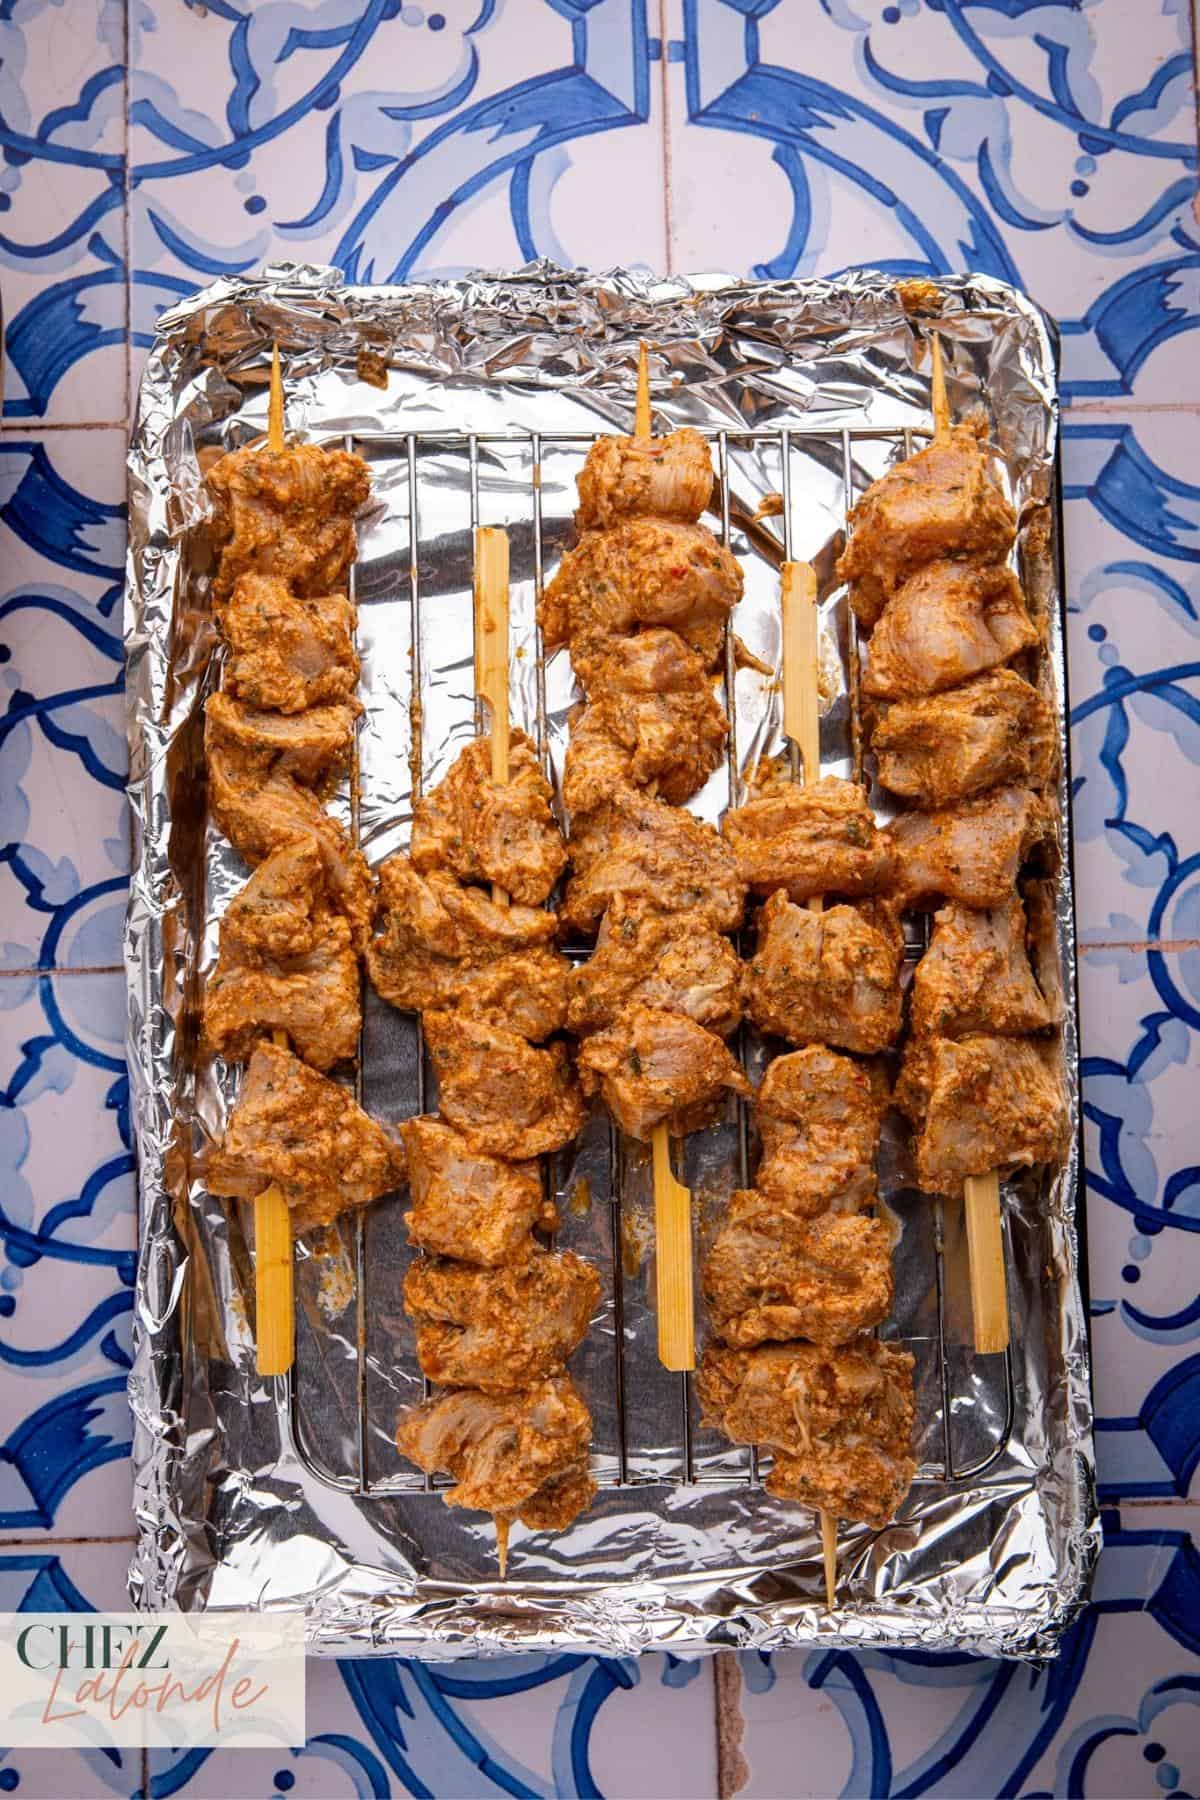 start by lining a baking sheet with foil for easy cleaning. Place a metal rack on top and give it a quick spritz of cooking spray to prevent sticking. Arrange your skewers with space between them for even cooking.